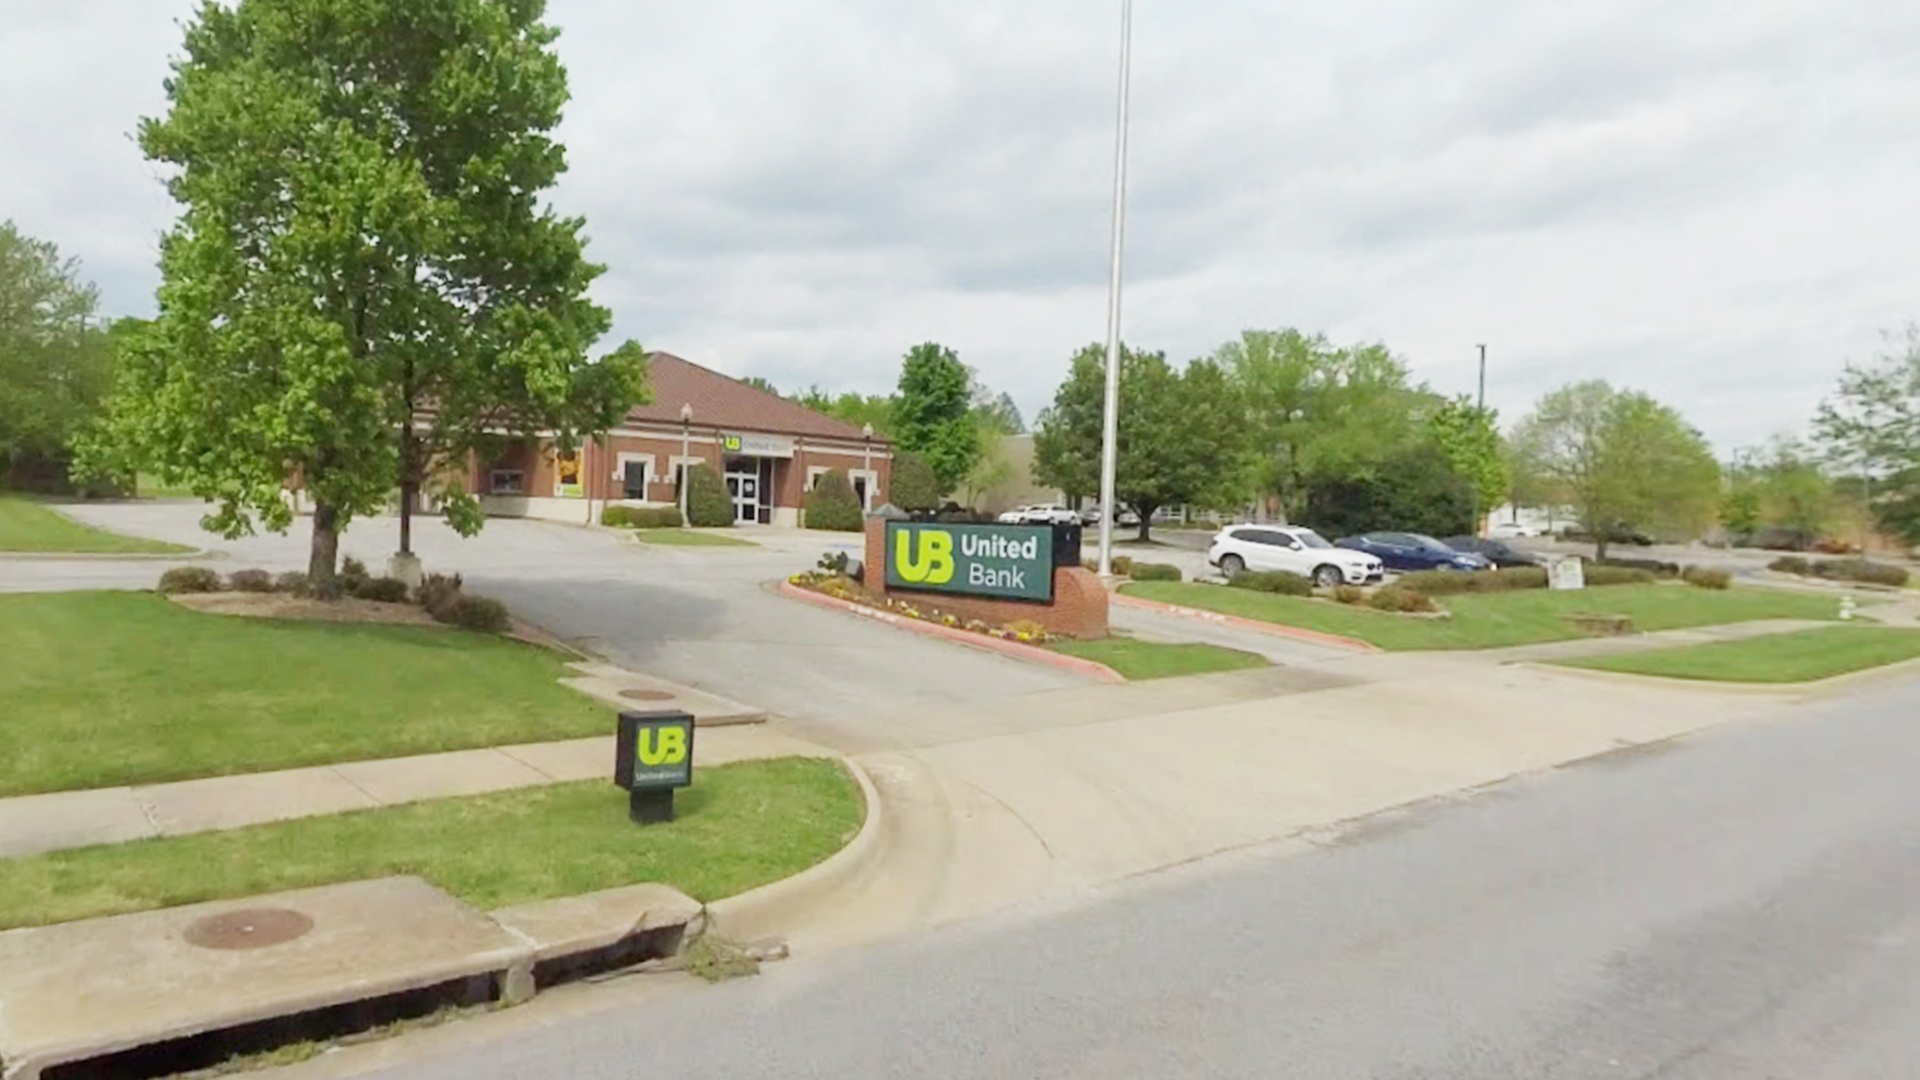 The following video was taken on scene at the United Bank robbery by 5NEWS employee Rene Gates.